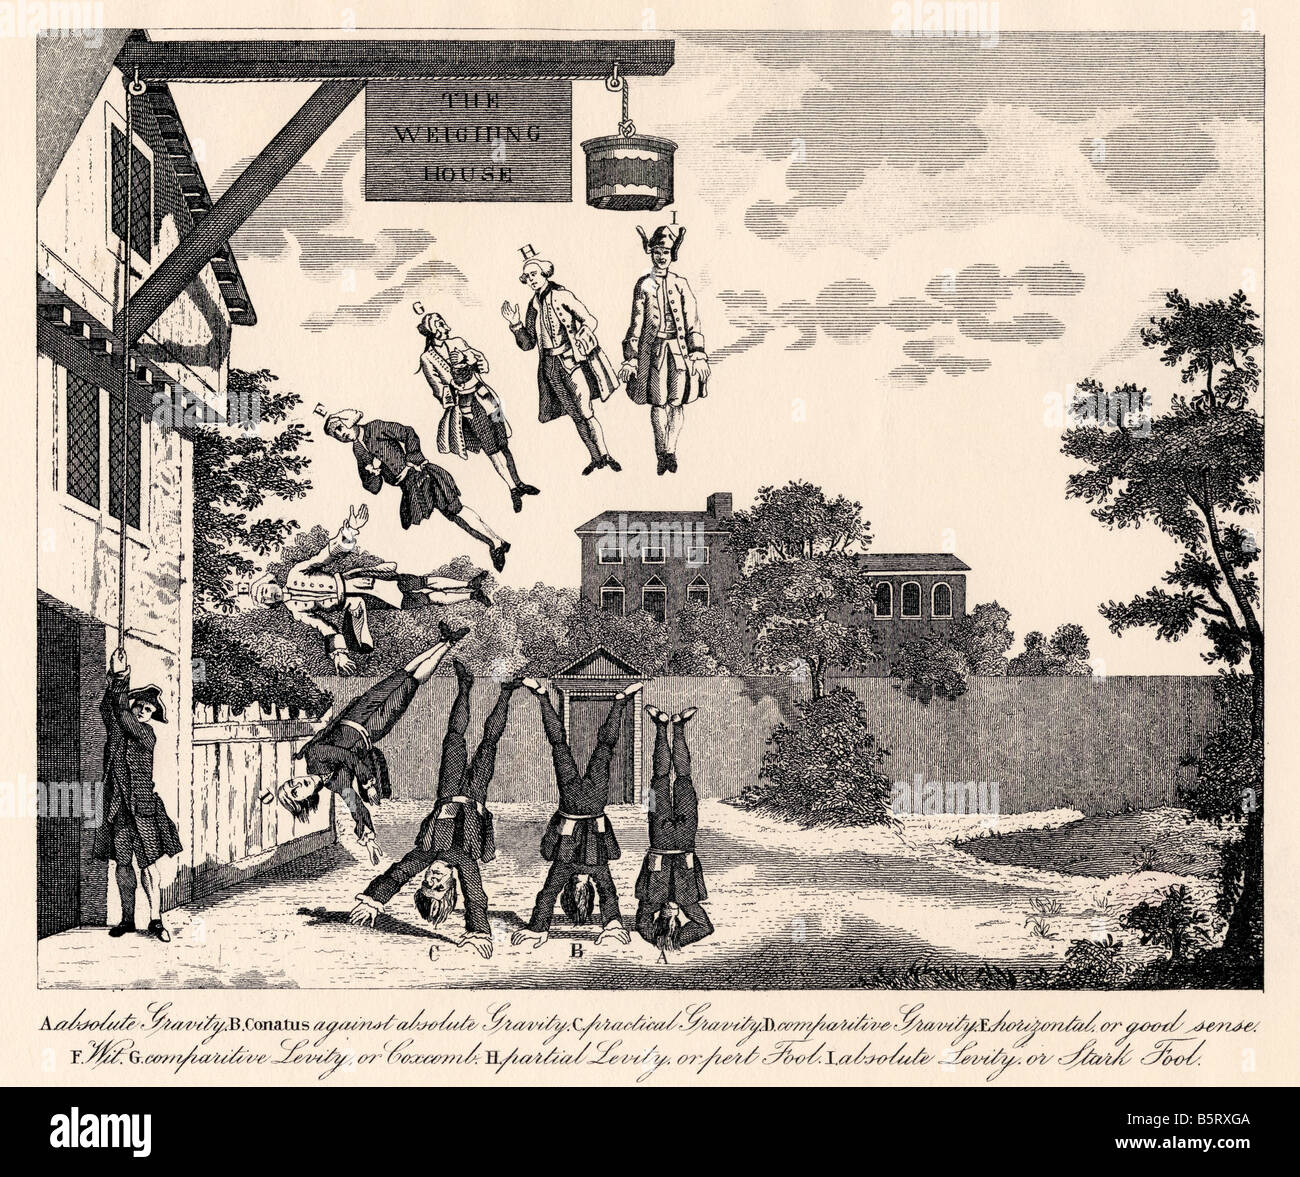 The Weighing House by William Hogarth. Weighing the degrees of dumbness and foolishness. Stock Photo